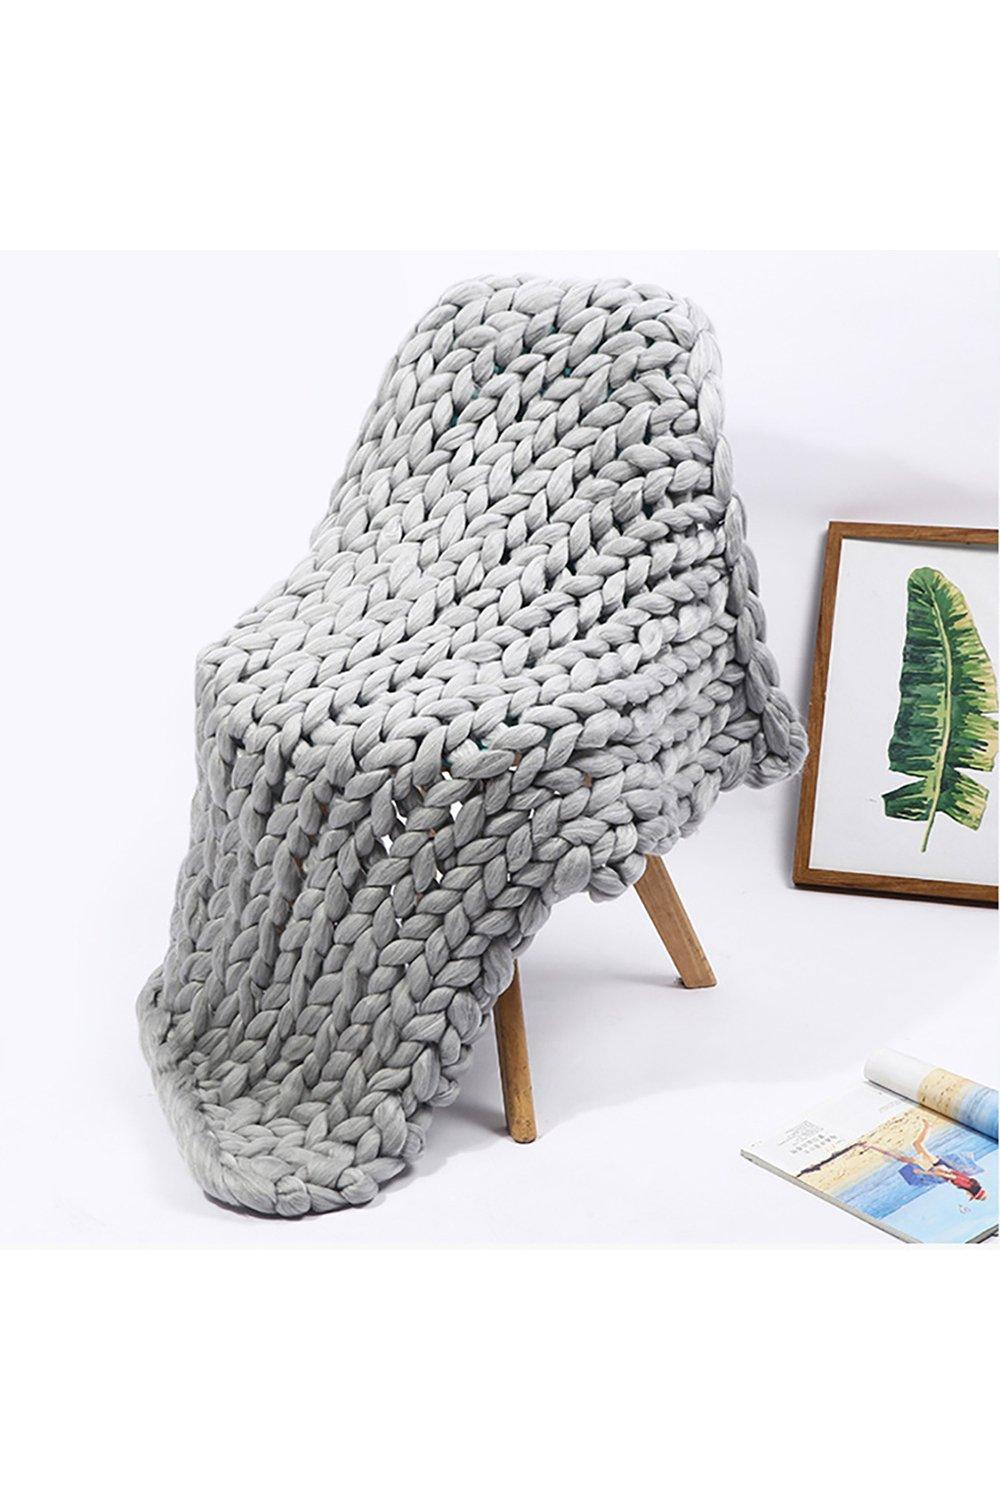 Hand-Knitted Super Thick Wool Blanket Sofa Bed Chair Blanket 60x60cm